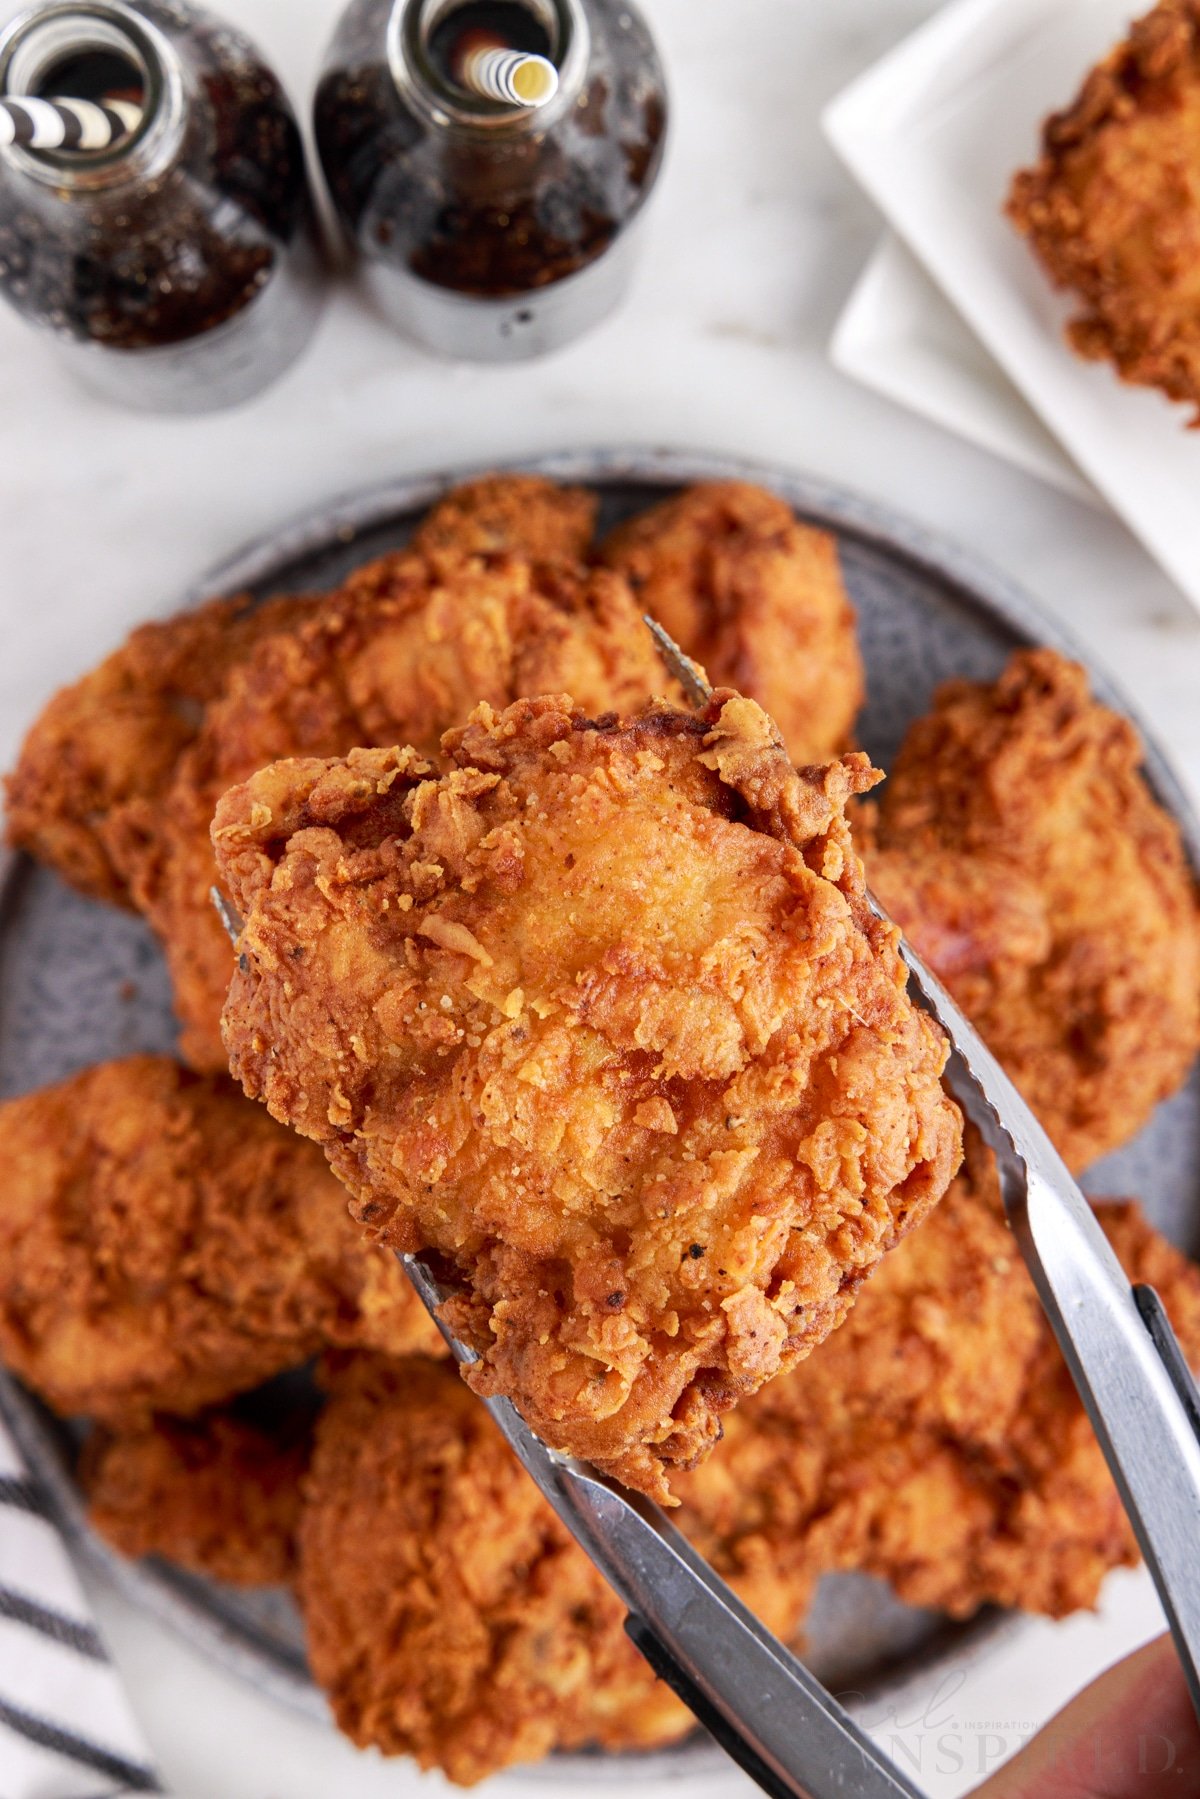 Fried chicken on a serving plate with metal tongs picking up a piece of fried chicken, navy striped linen, white serving plates with pieces of fried chicken, two bottles of soda with decorative straws on a white marble surface.